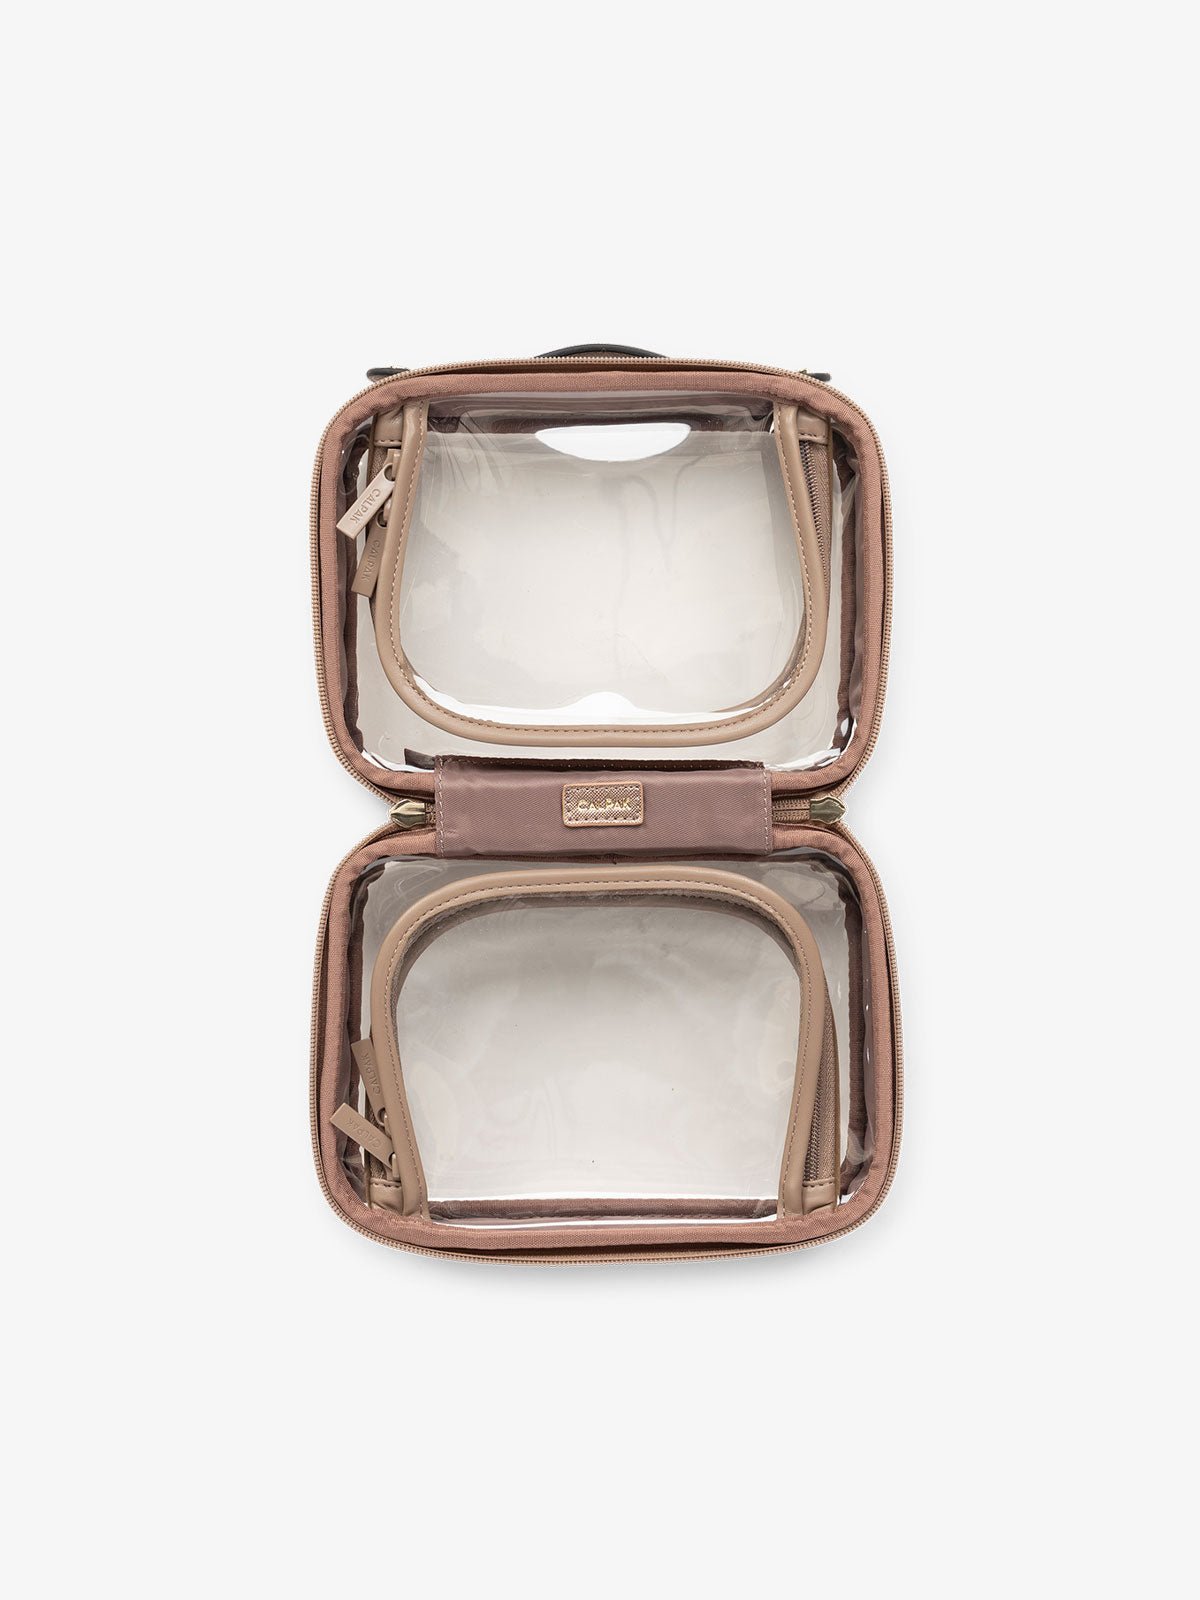 CALPAK small clear skincare bag with multiple zippered compartments in metallic brown bronze